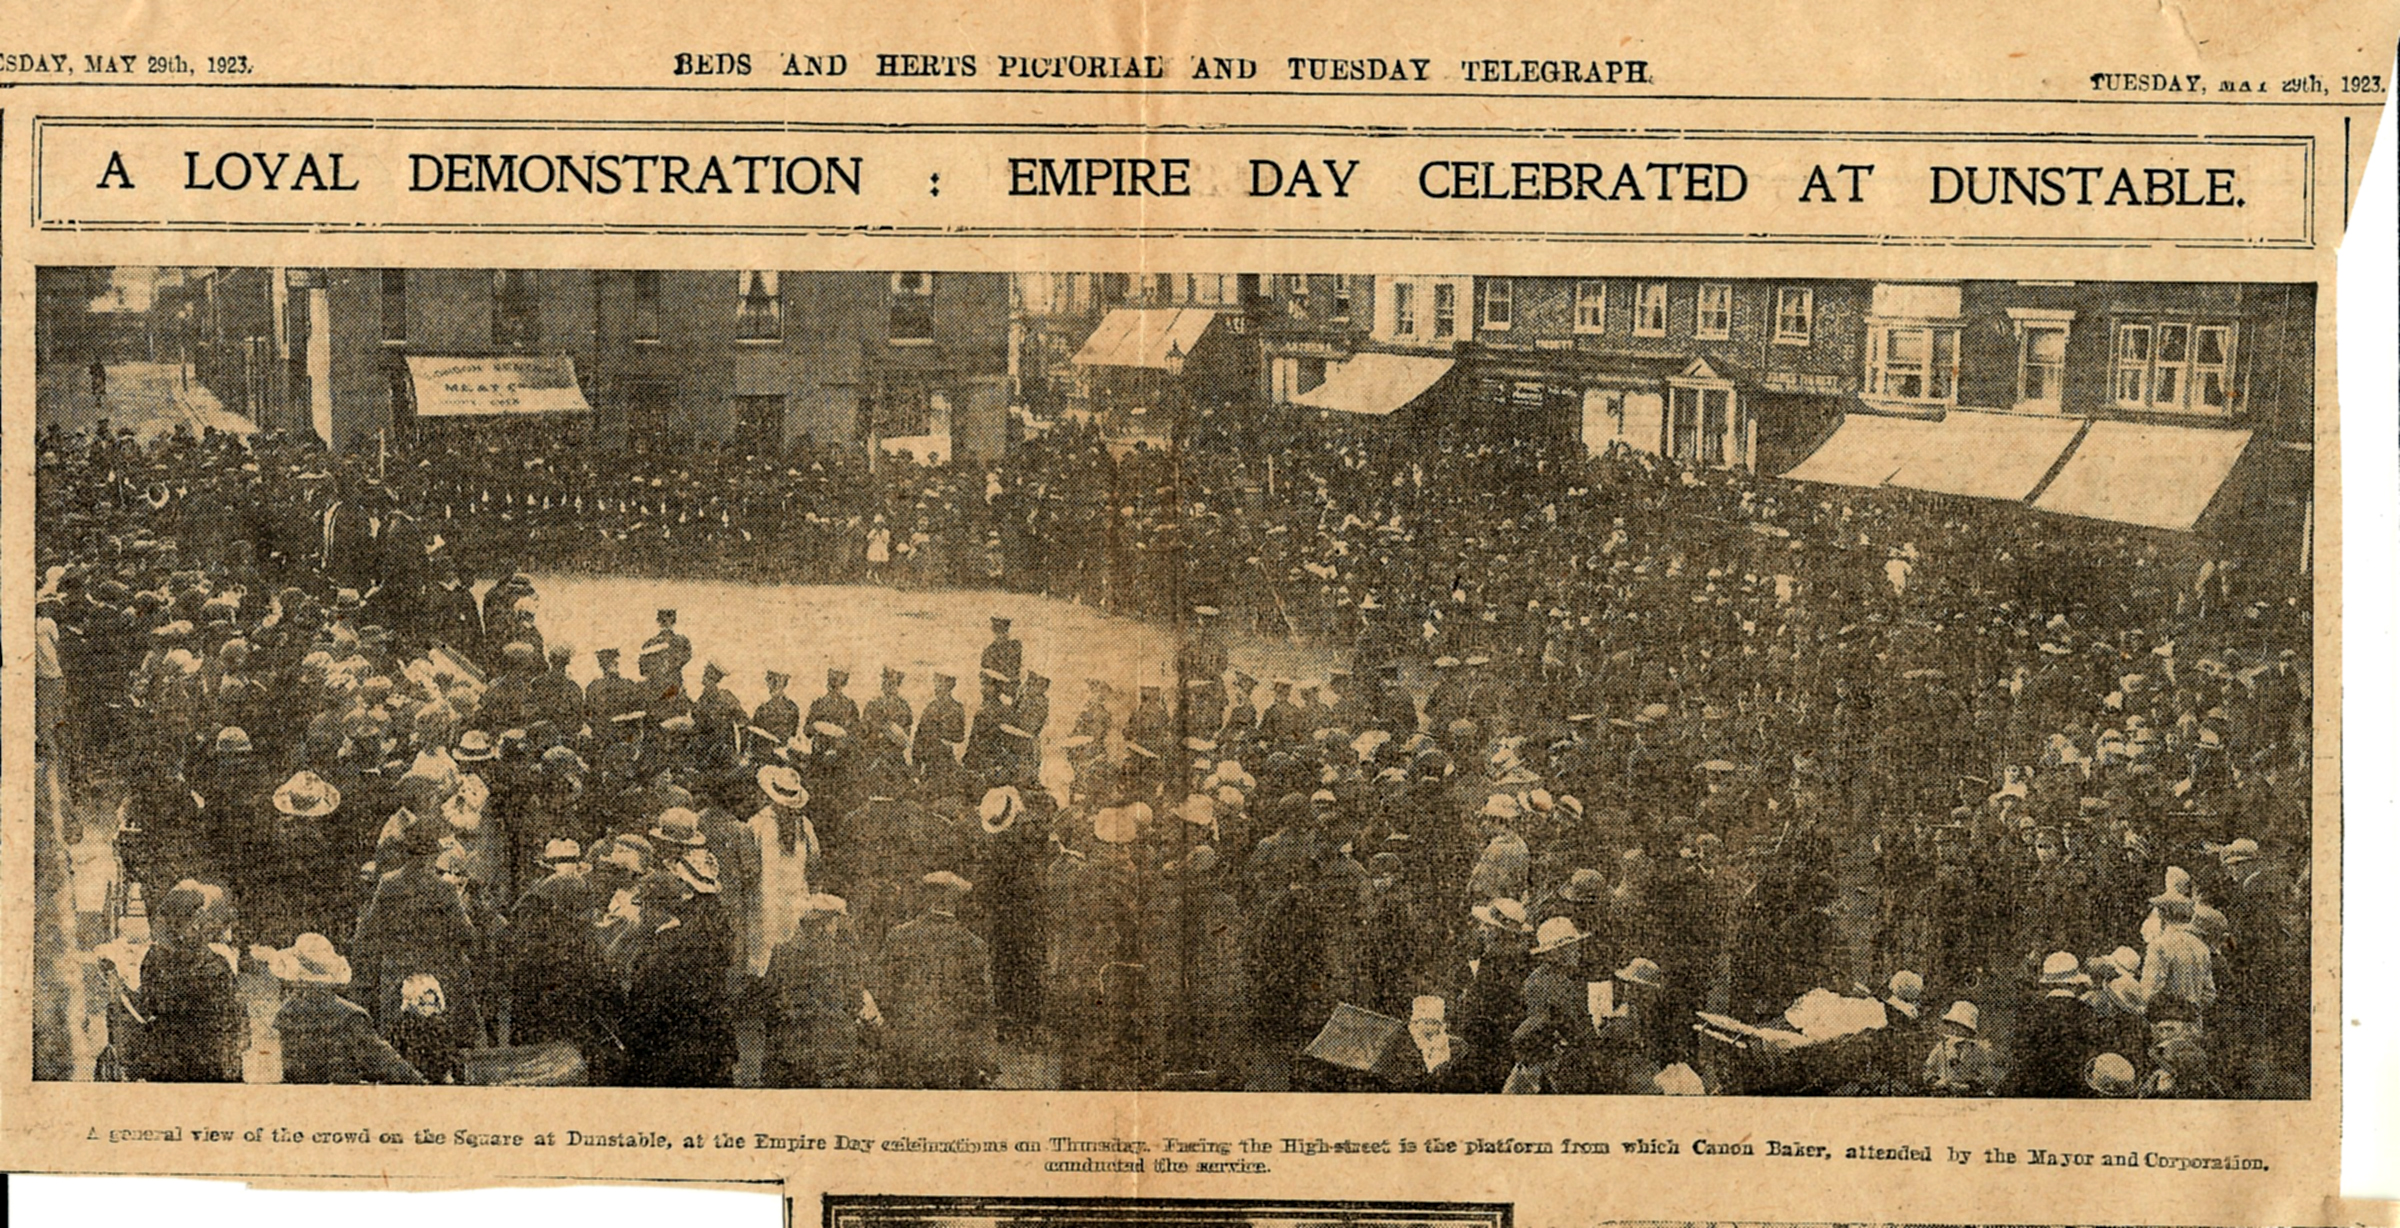 Newspaper cutting of empire day taking place in the square, large crowd.